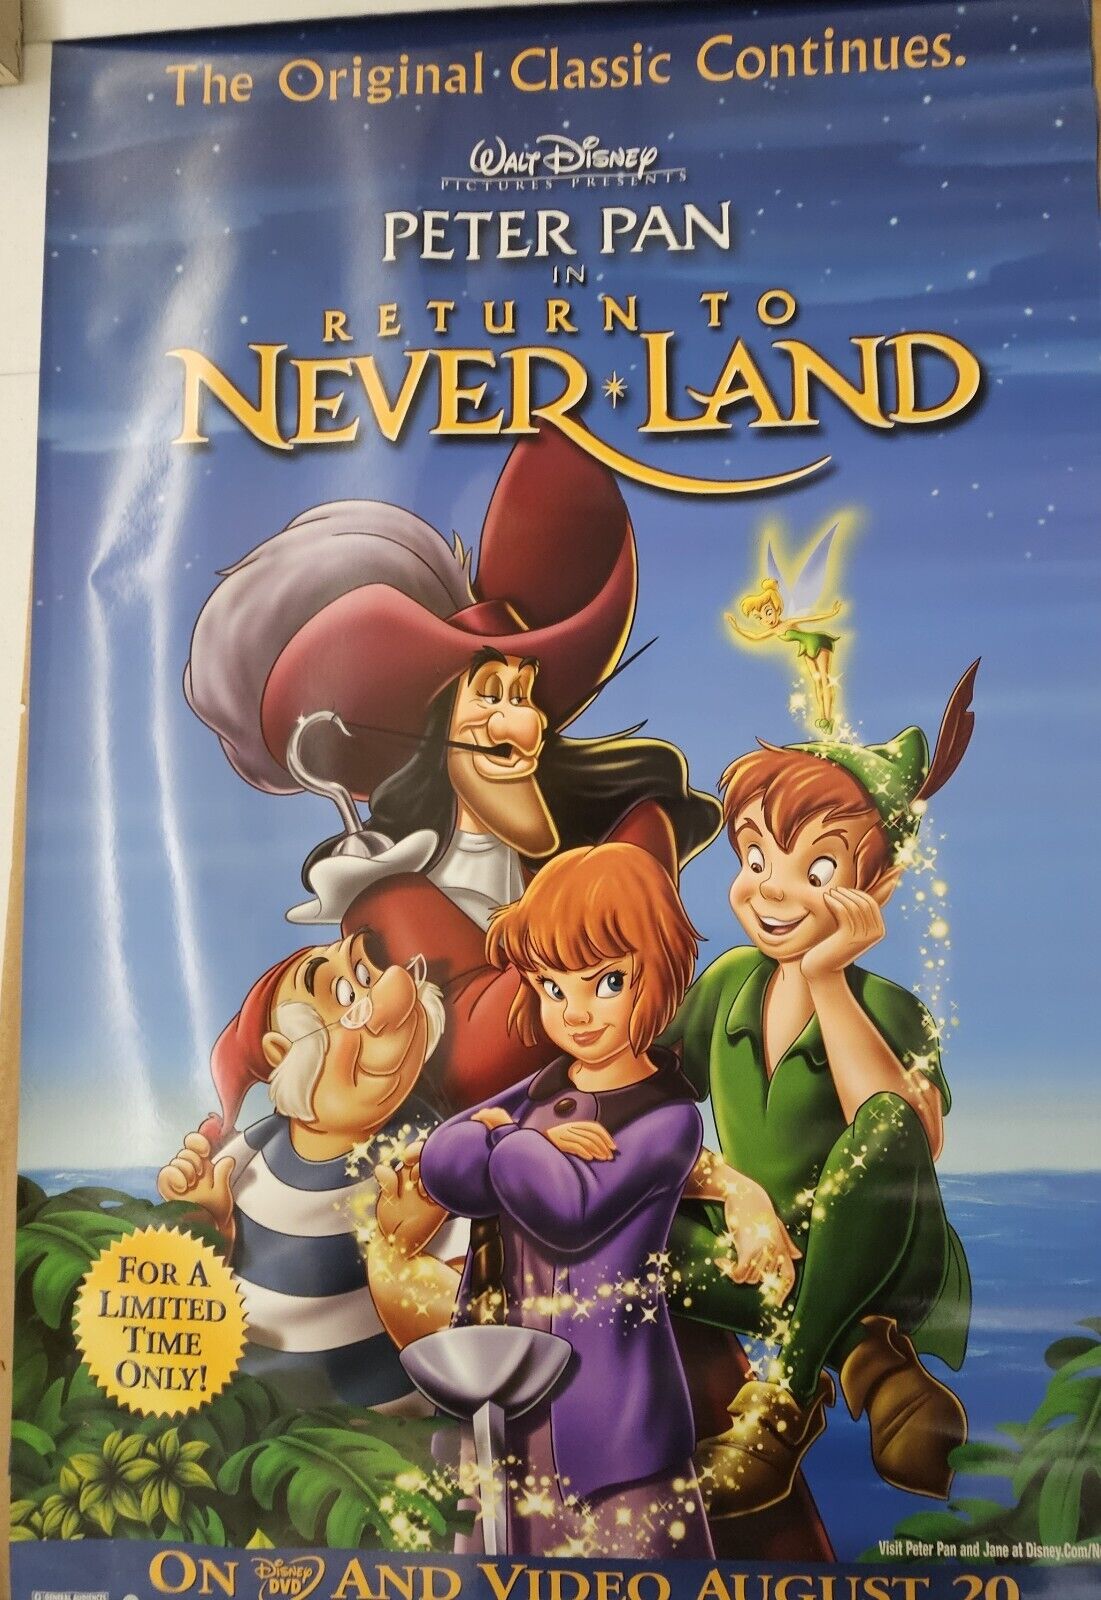 Disney's Peter Pay Return to neverland 26 x 39.75 DVD poster